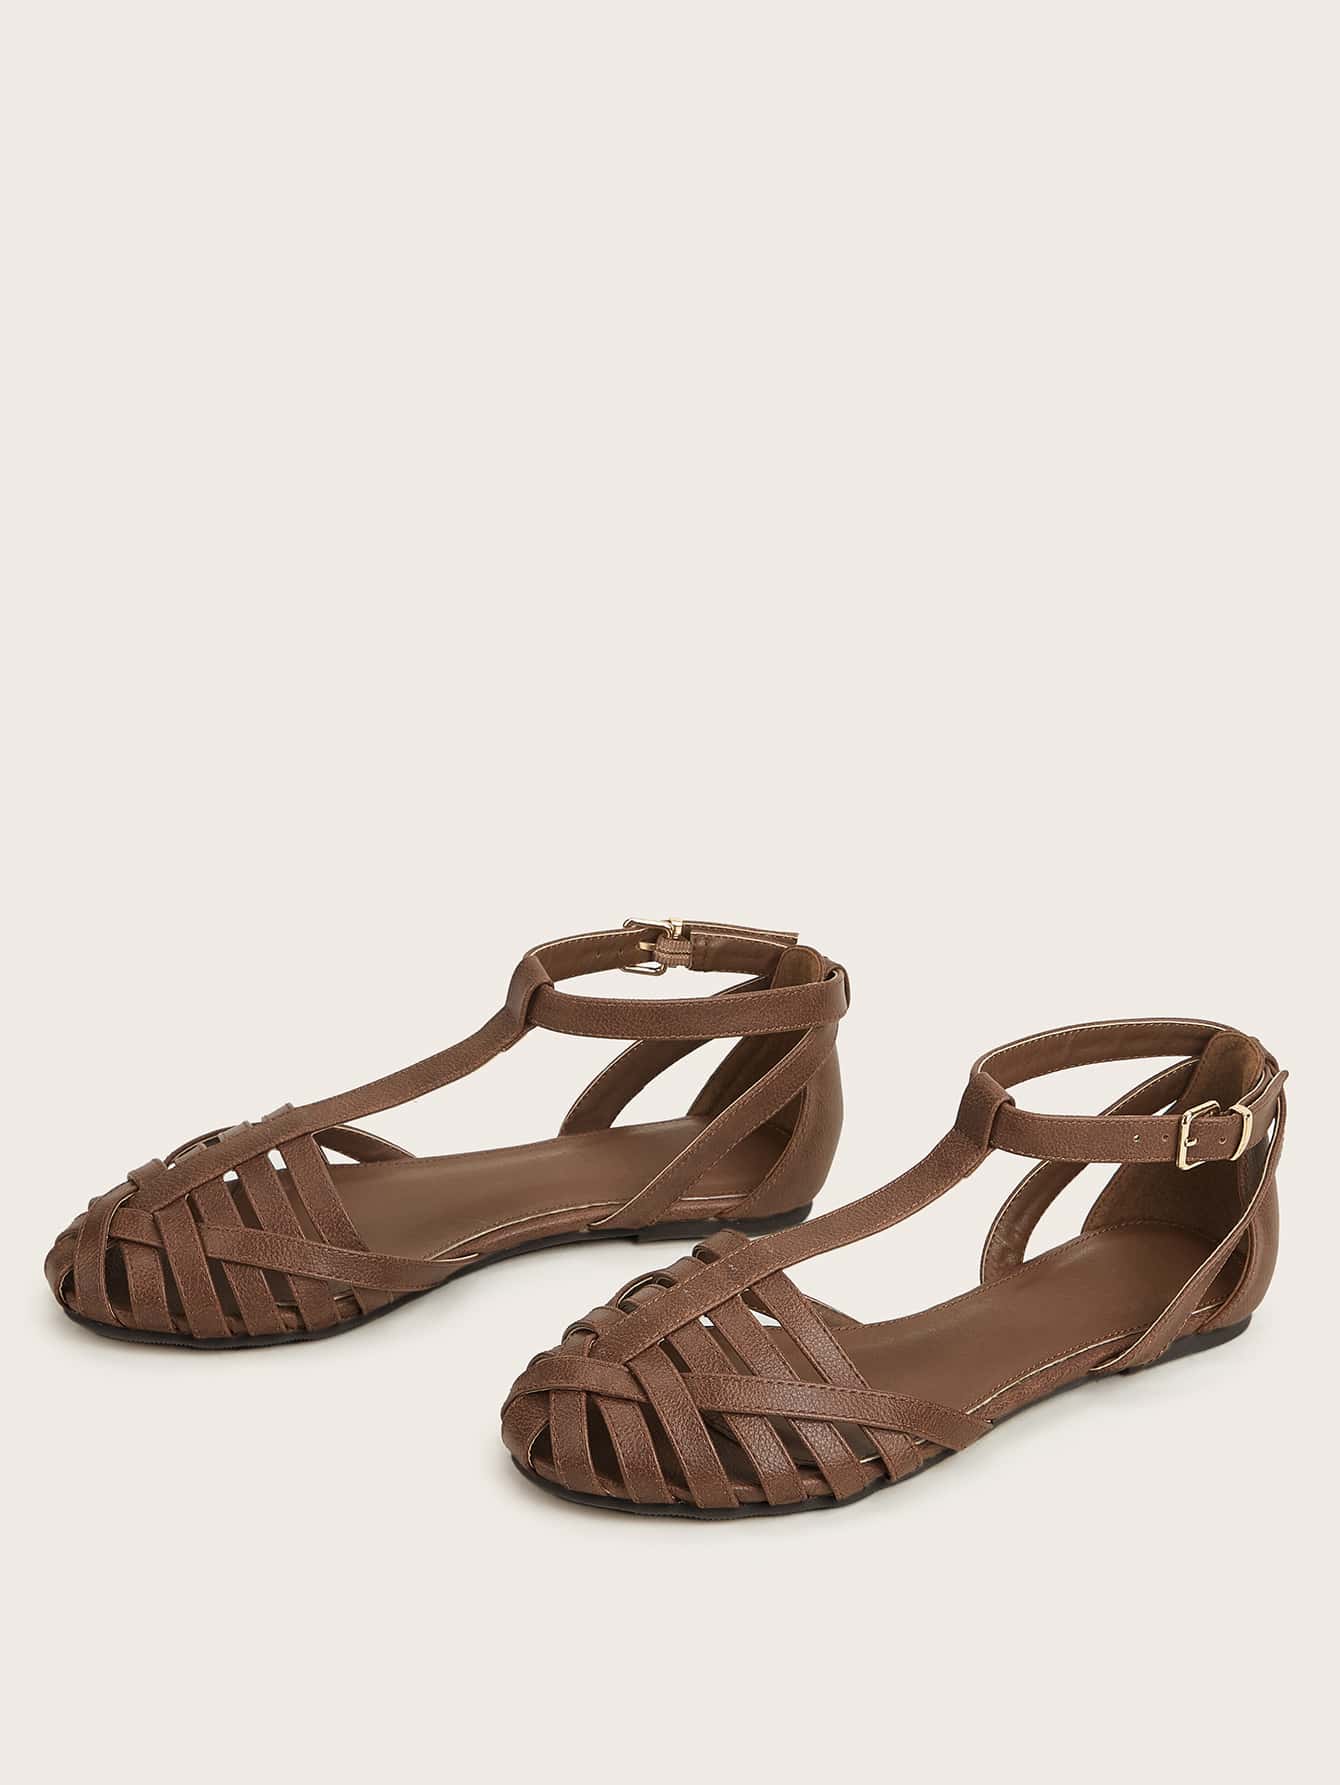 Buckle & Hollow Out Detail Ankle Strap Flats, Coffee Brown Elegant Solid Color Women's Flat Shoes